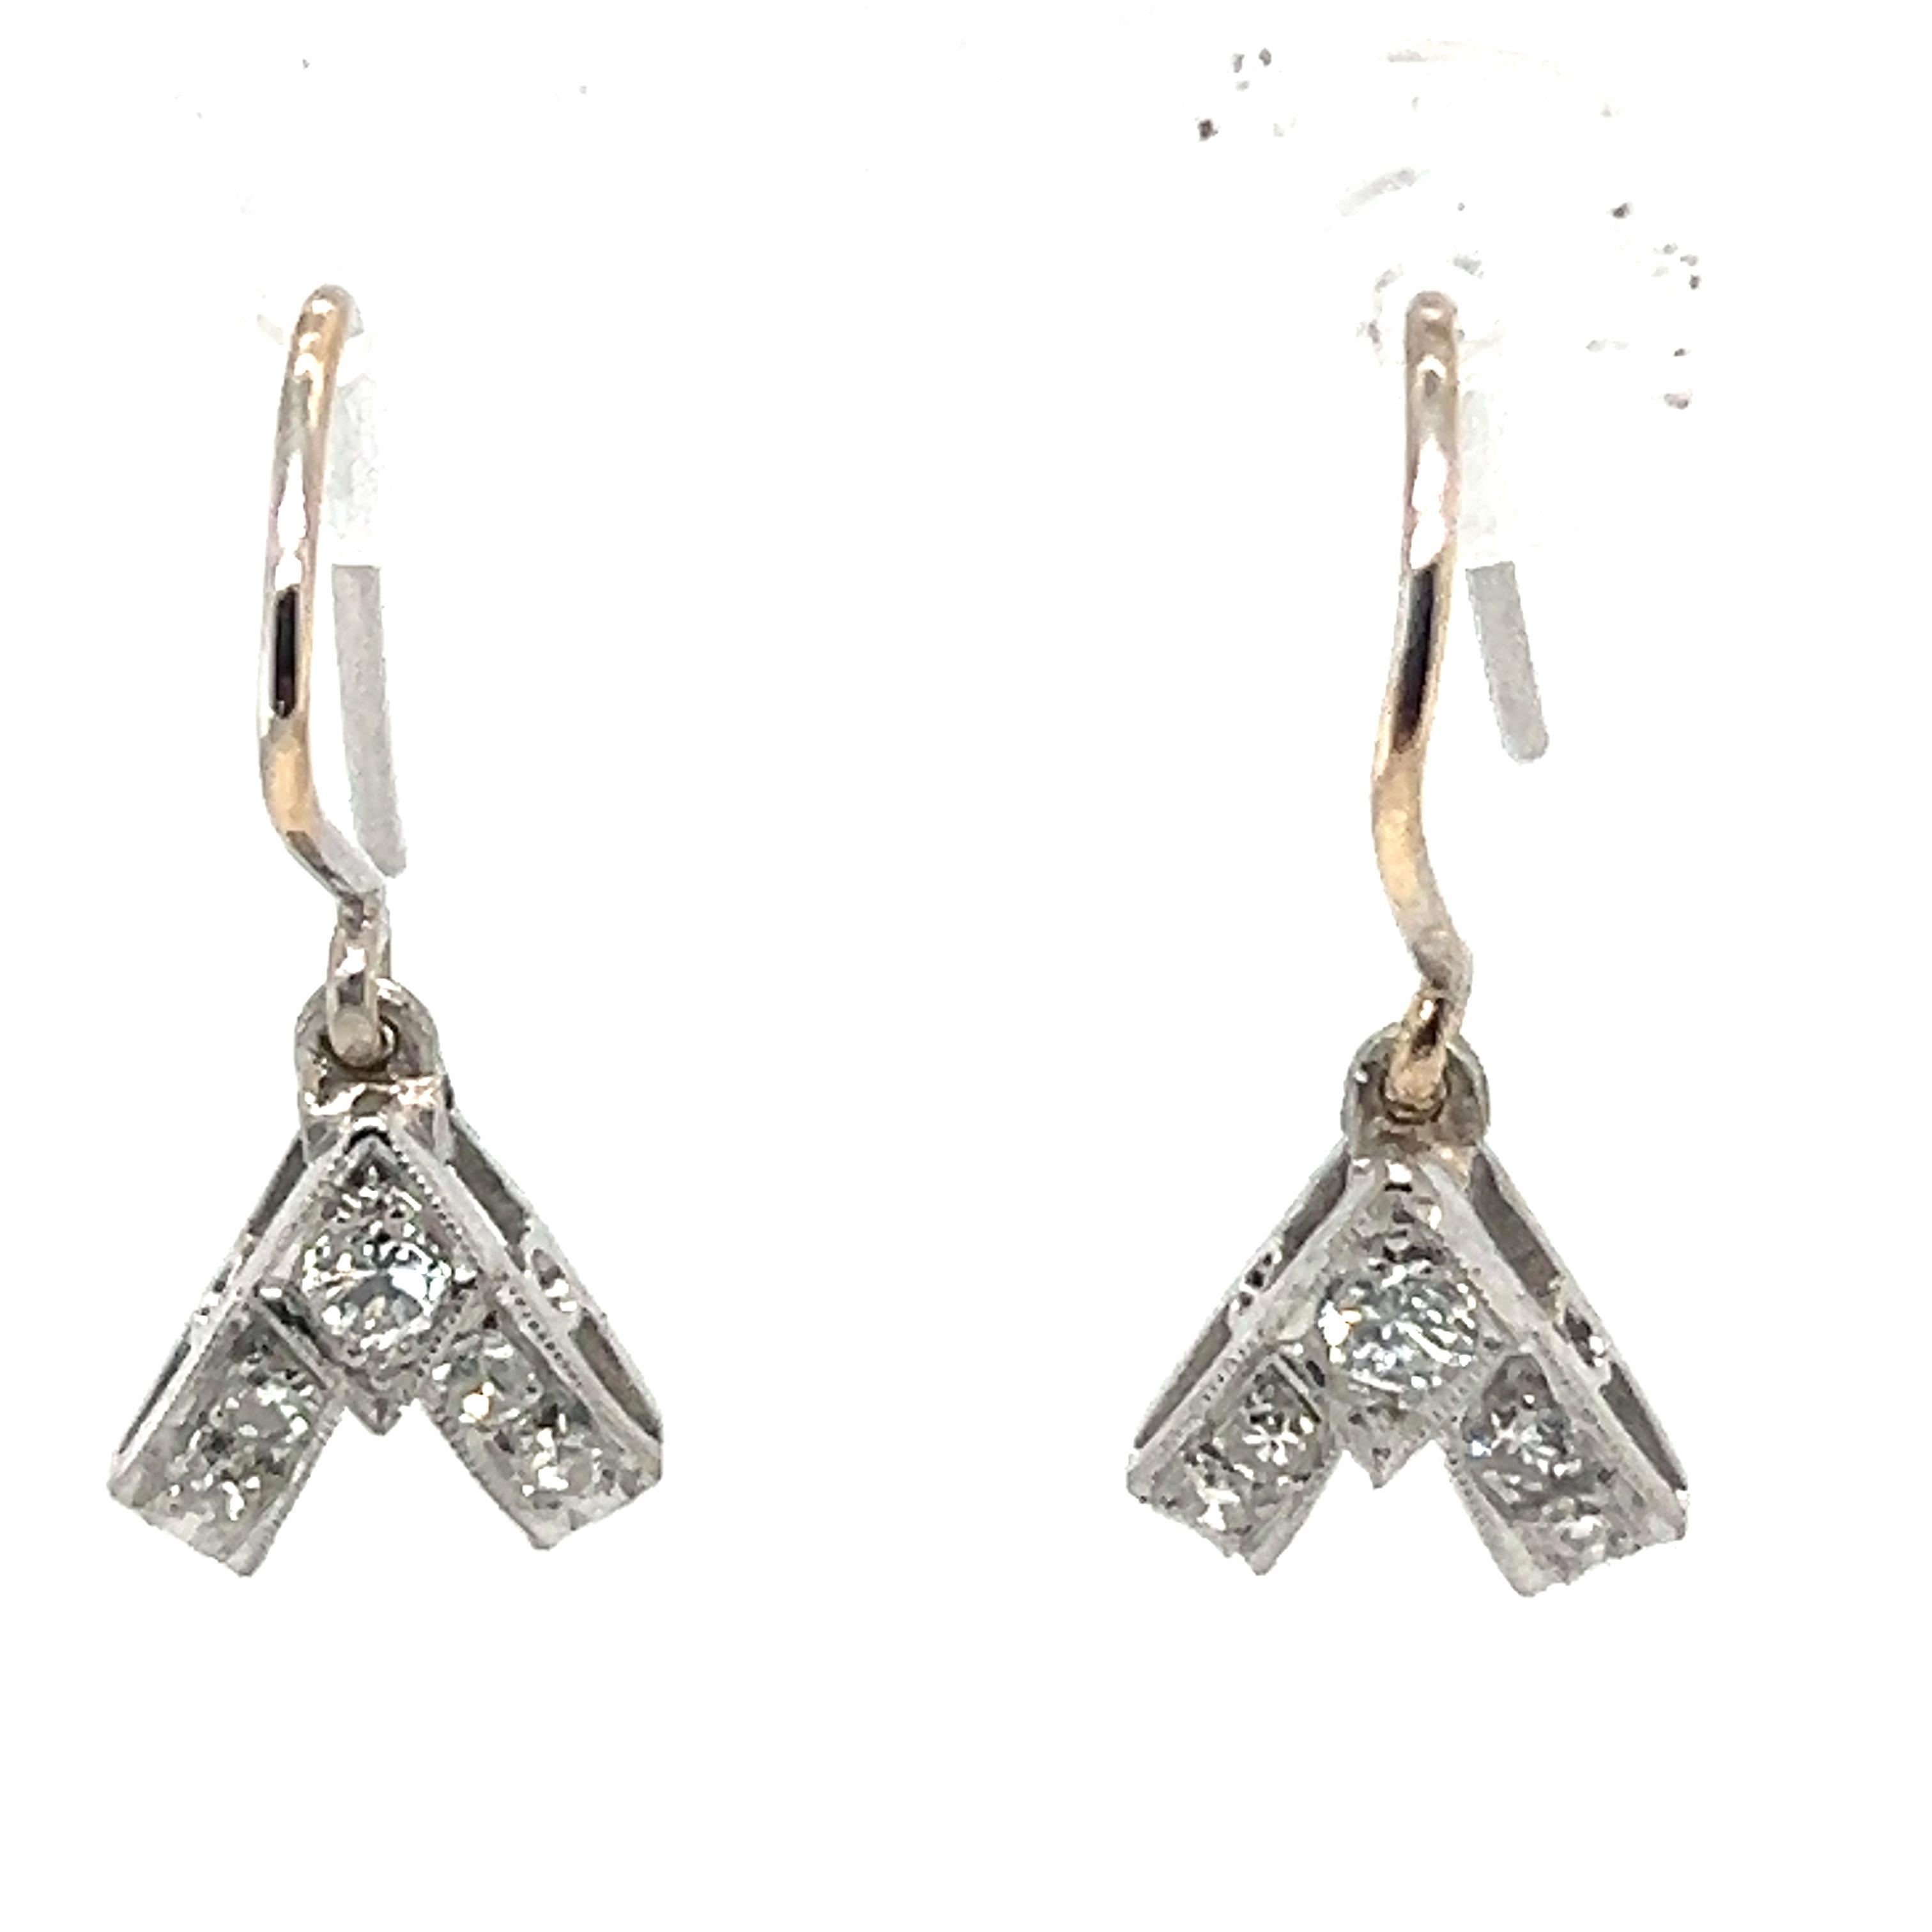 A Pair Of Vee-Shaped Drop Earrings, each set with a round brilliant cut diamond and 4 single cut diamonds bead set in 18ct white gold. 14ct gold wire hook fittings.

Diamonds 2 = 0.11ct (estimated), Graded in setting as Colour: G, Clarity: VS

8 =